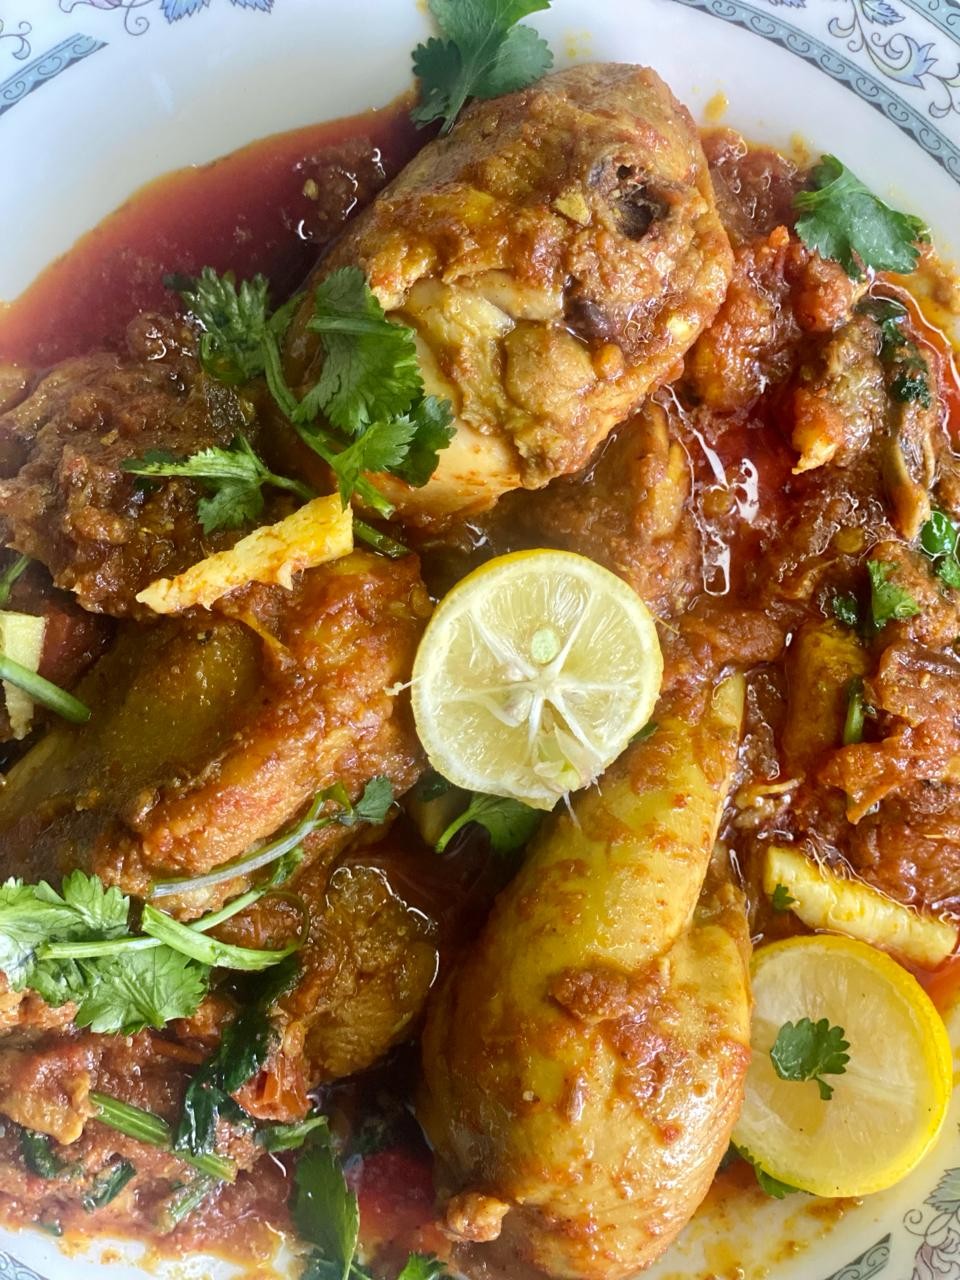 More About Chicken Karahi?